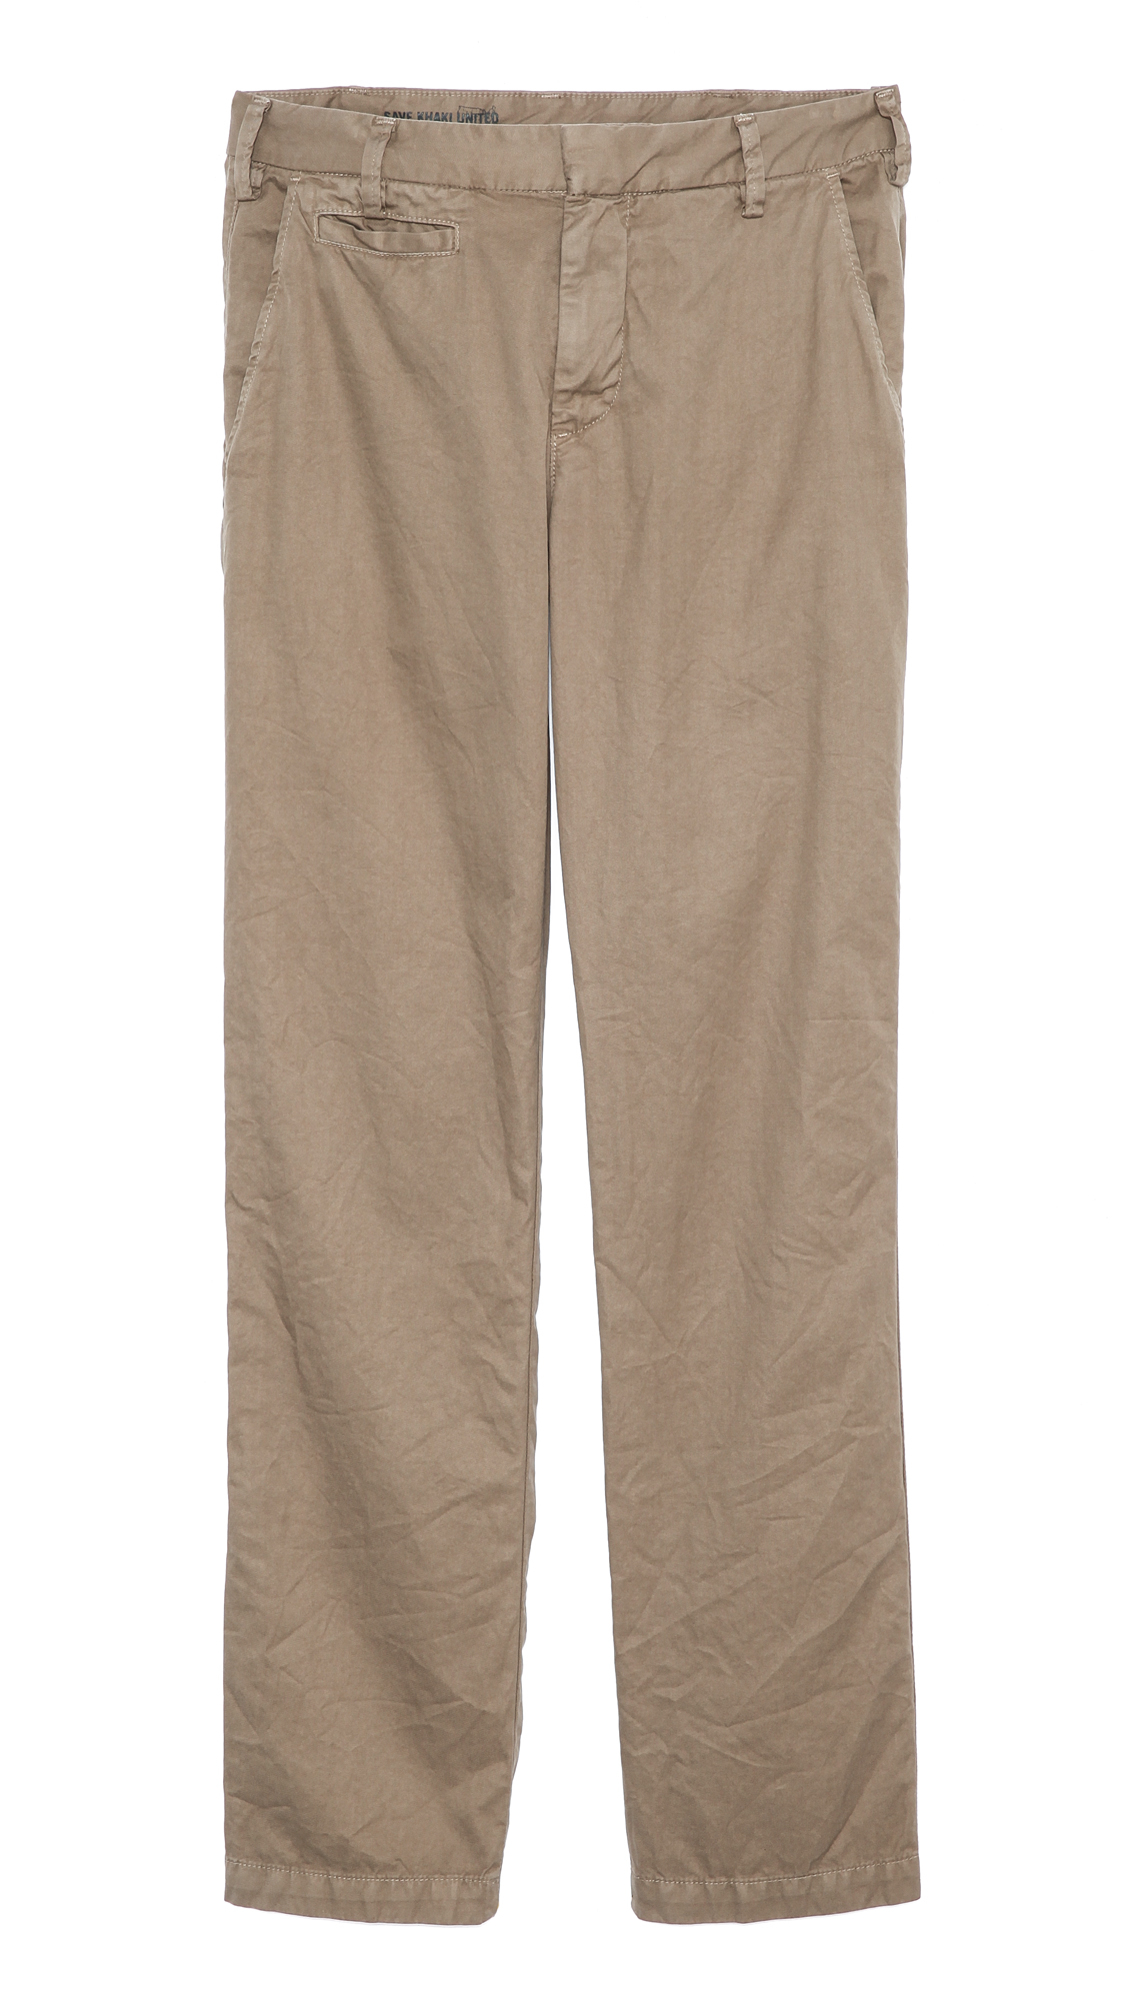 Lyst - Save Khaki Light Twill Slim Chinos in Natural for Men